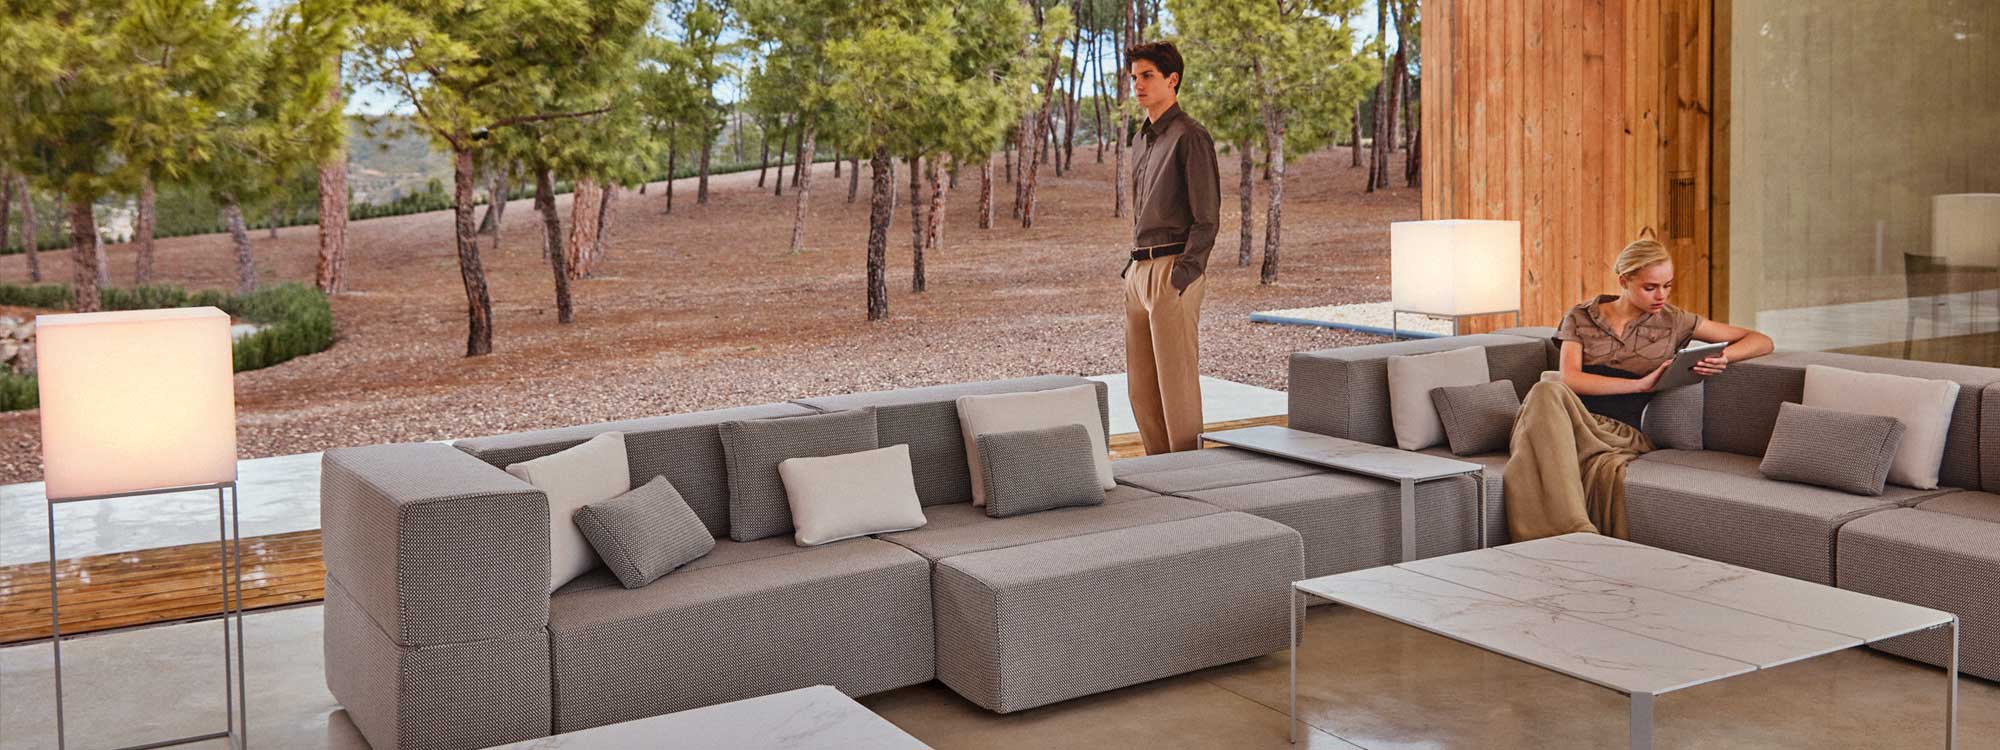 Image of Vondom Tablet modern garden sofa in neutral upholstery, with dry woodland in the background